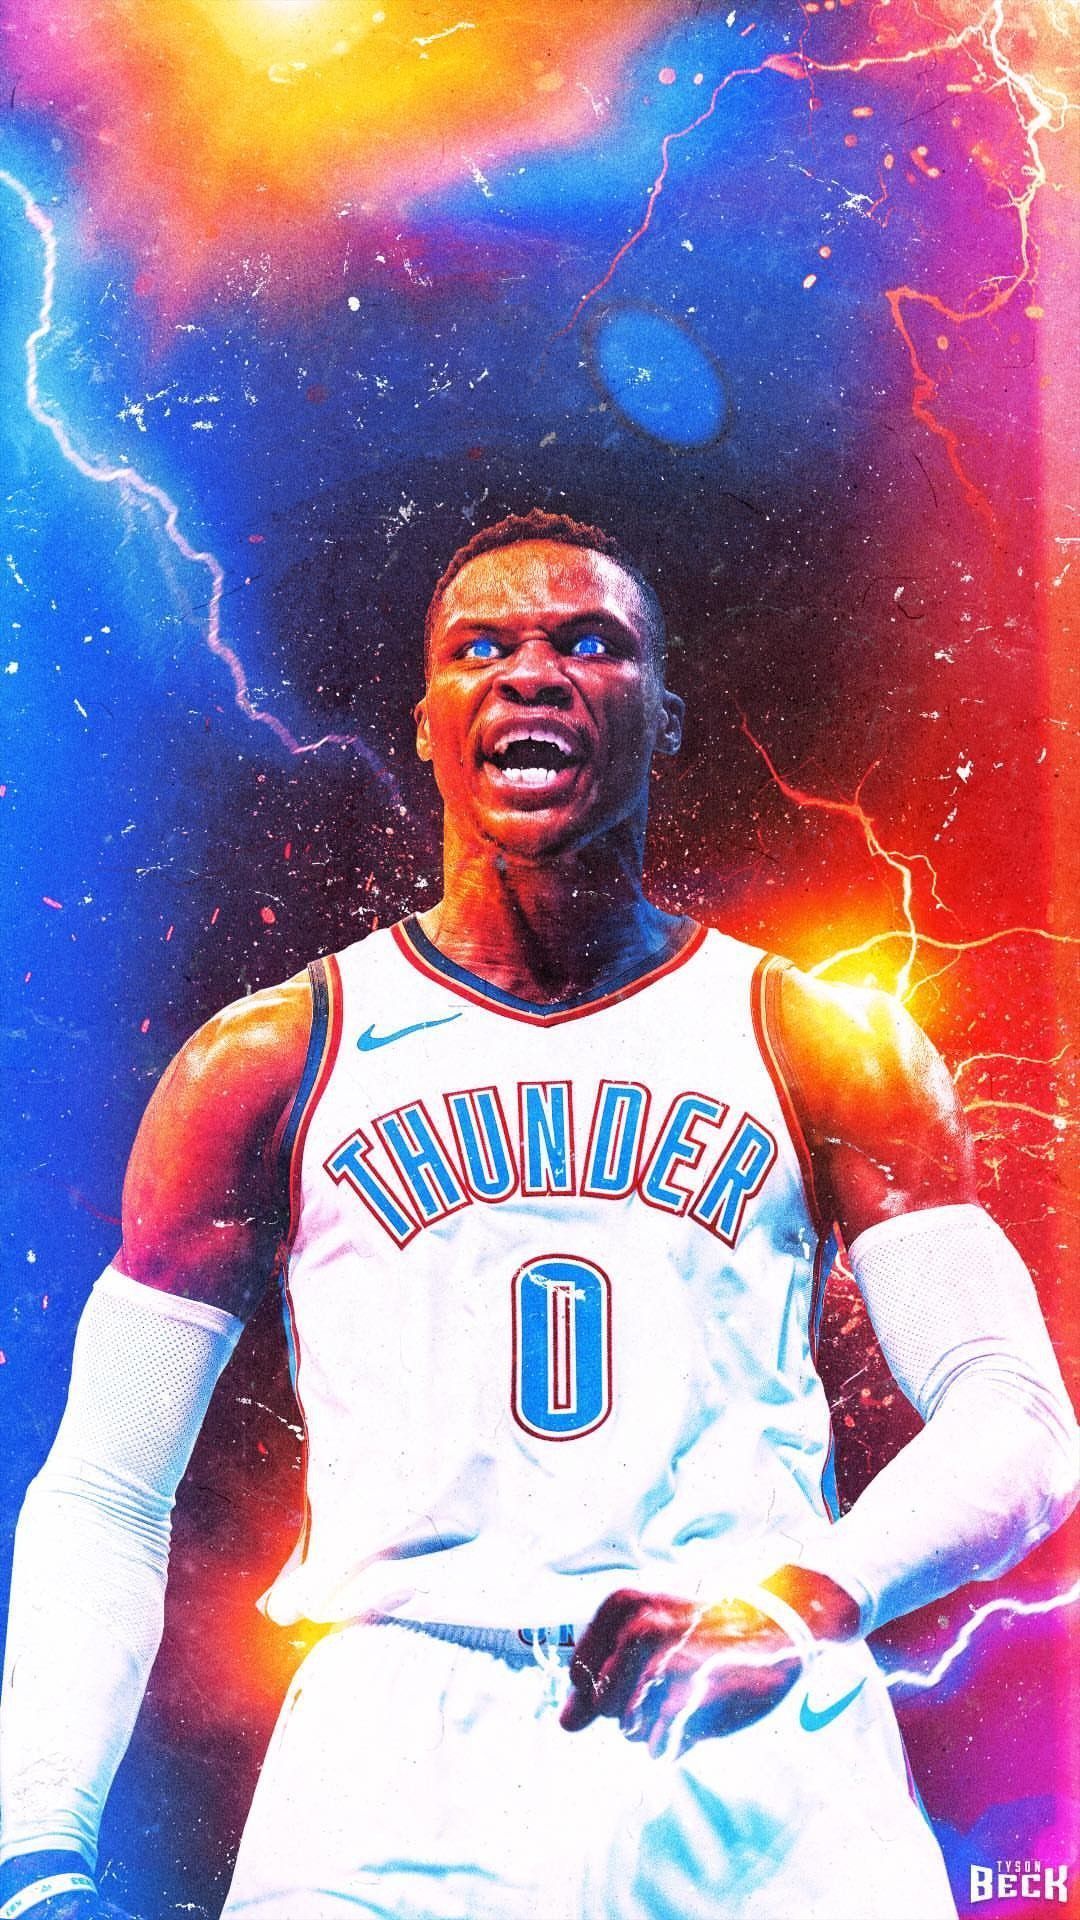 Russell Westbrook Wallpaper for mobile phone, tablet, desktop computer and other devices HD and. Westbrook wallpaper, Russell westbrook wallpaper, Nba wallpaper